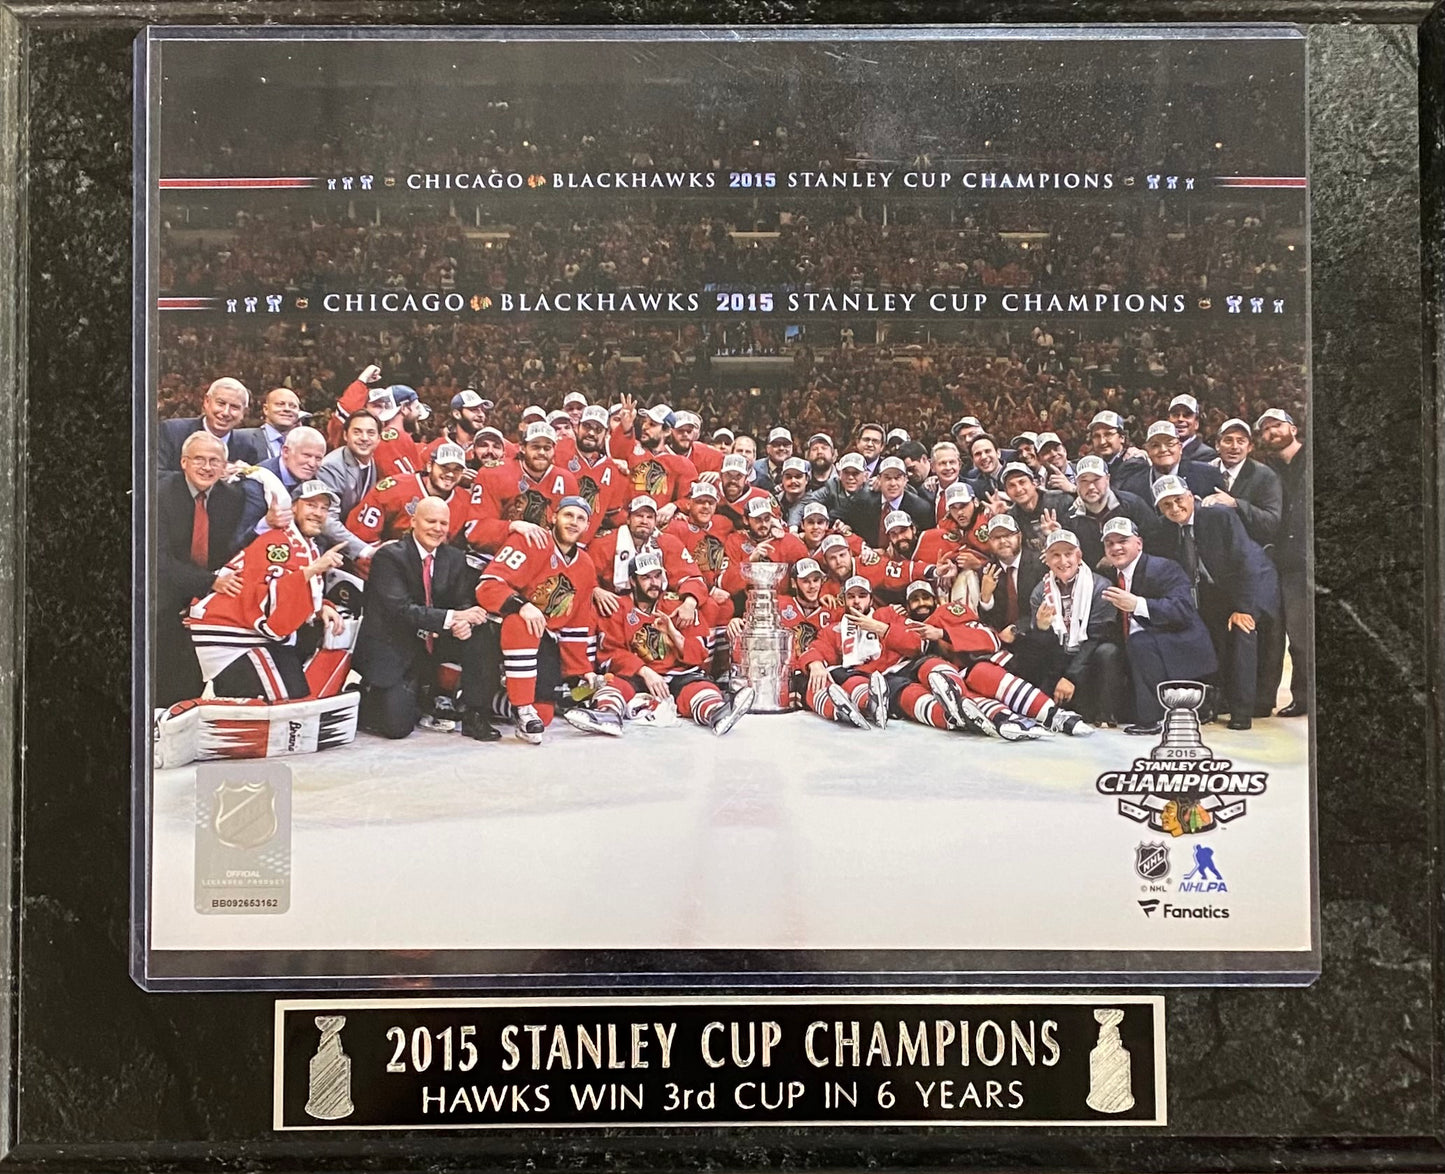 Chicago Blackhawks 2015 Stanley Cup Champions Wall Plaque